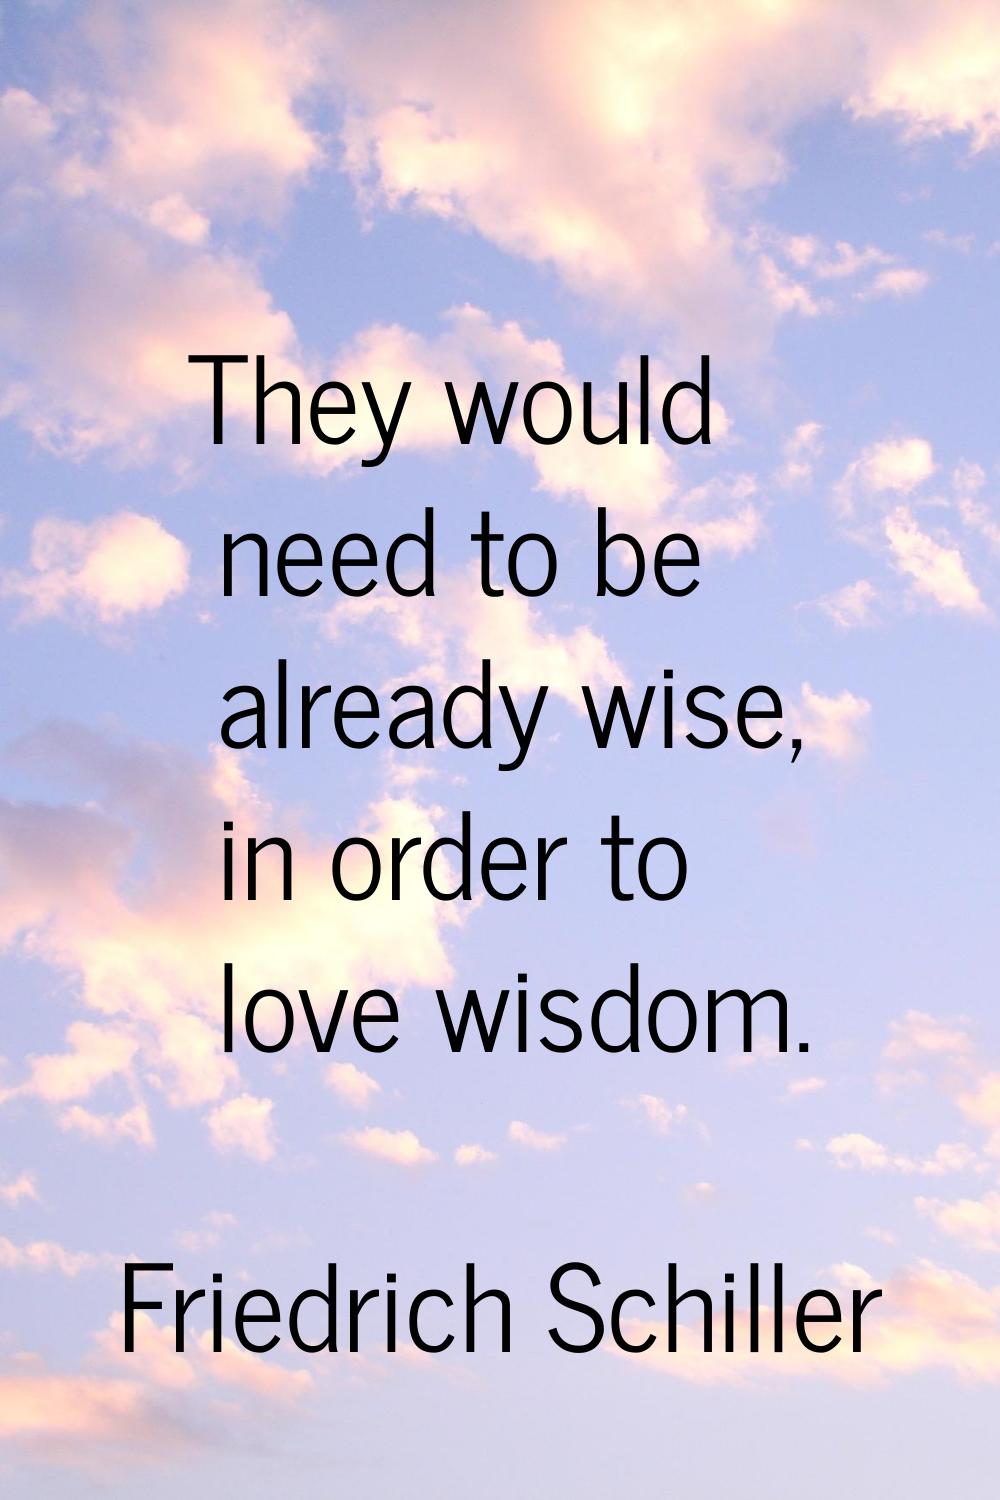 They would need to be already wise, in order to love wisdom.